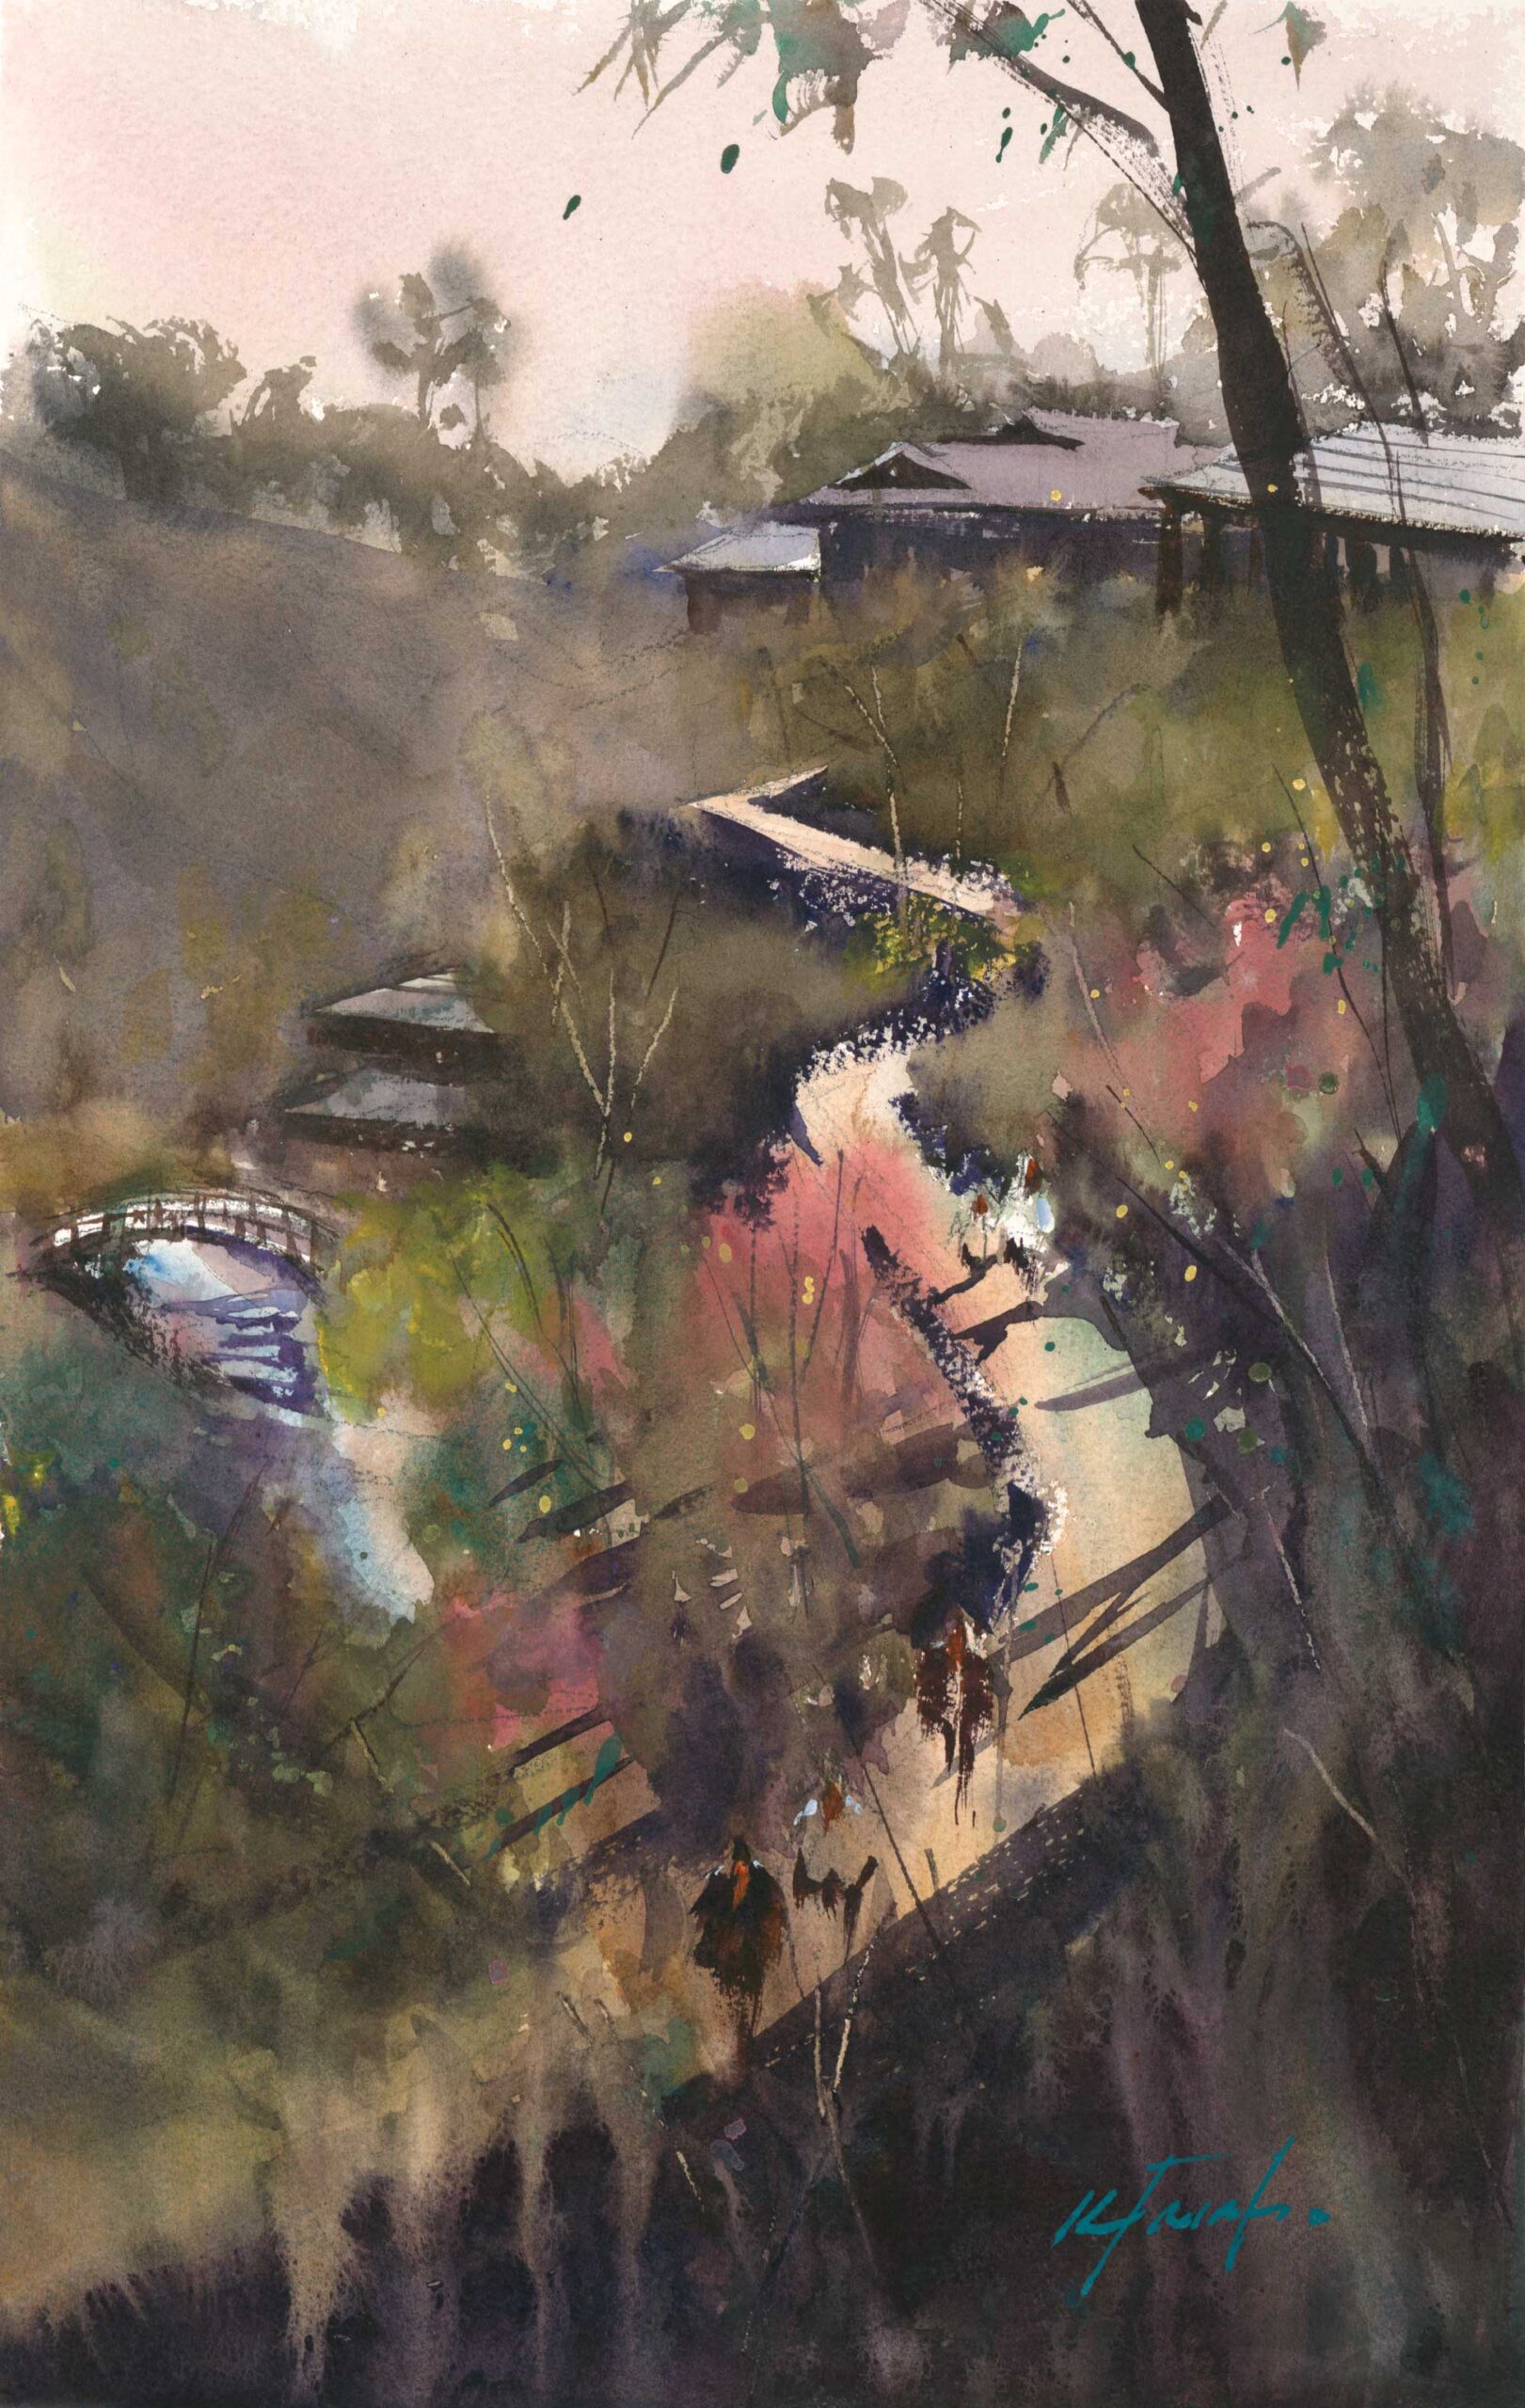 Keiko Tanabe, "Spring Has Arrived (Balboa Park, San Diego)," 2018, watercolor, 20 x 13 in., collection the artist, plein air 